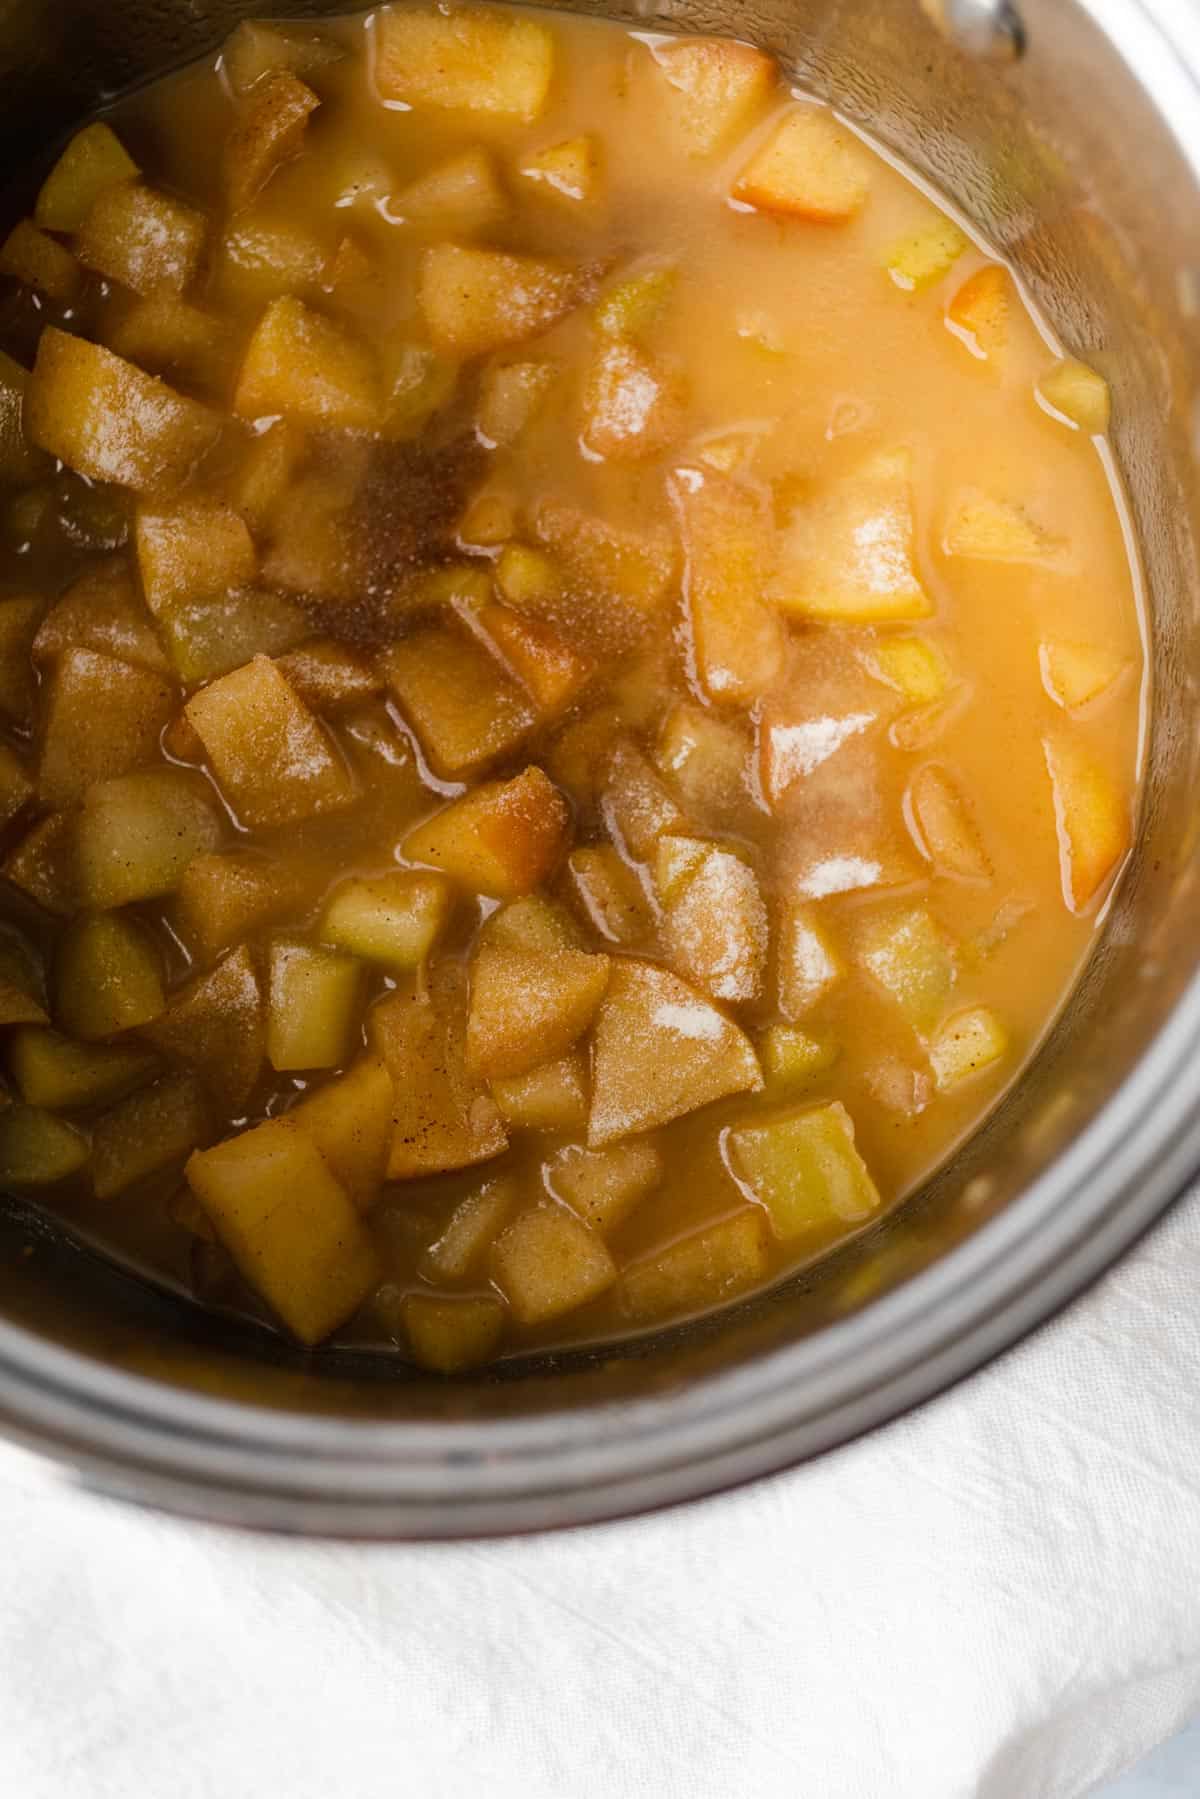 apples and zucchini simmering in a buttery spiced sauce